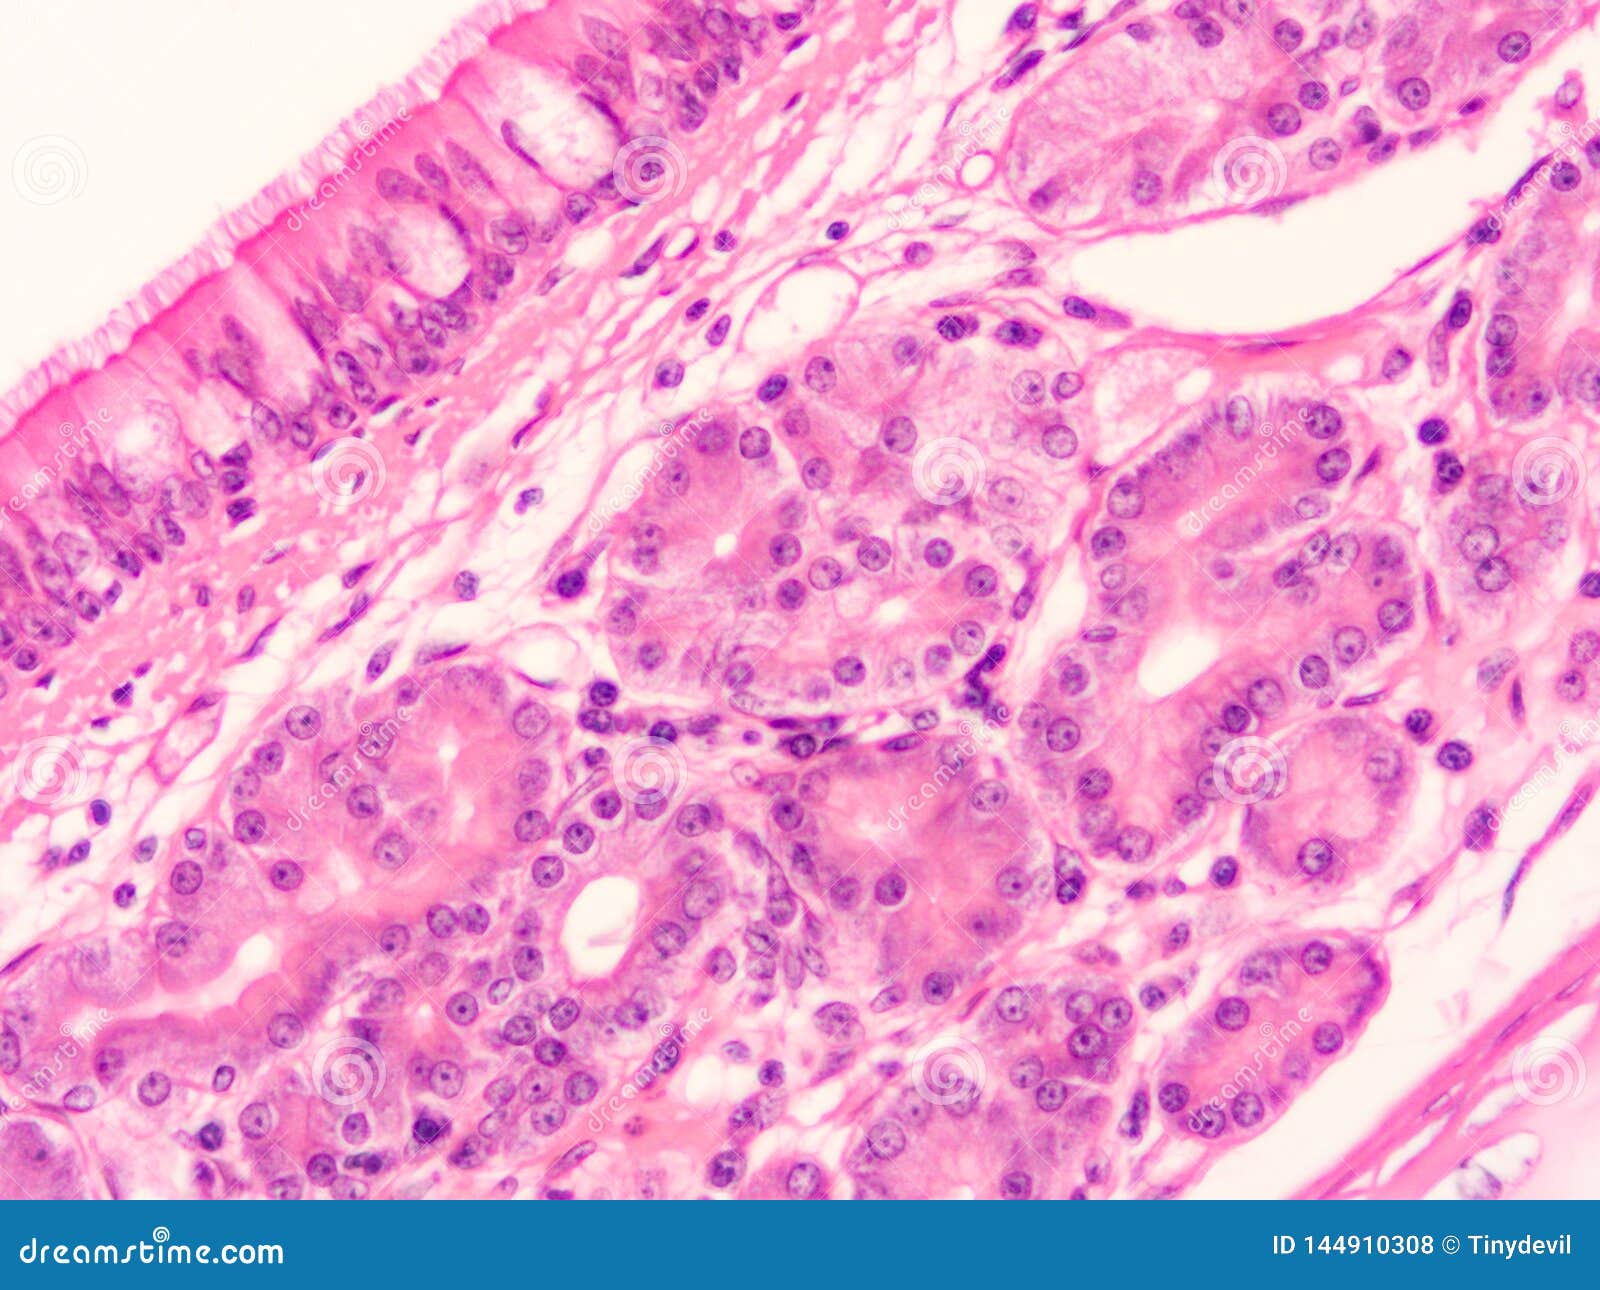 Histology Of Trachea Human Tissue Stock Photo - Image of research